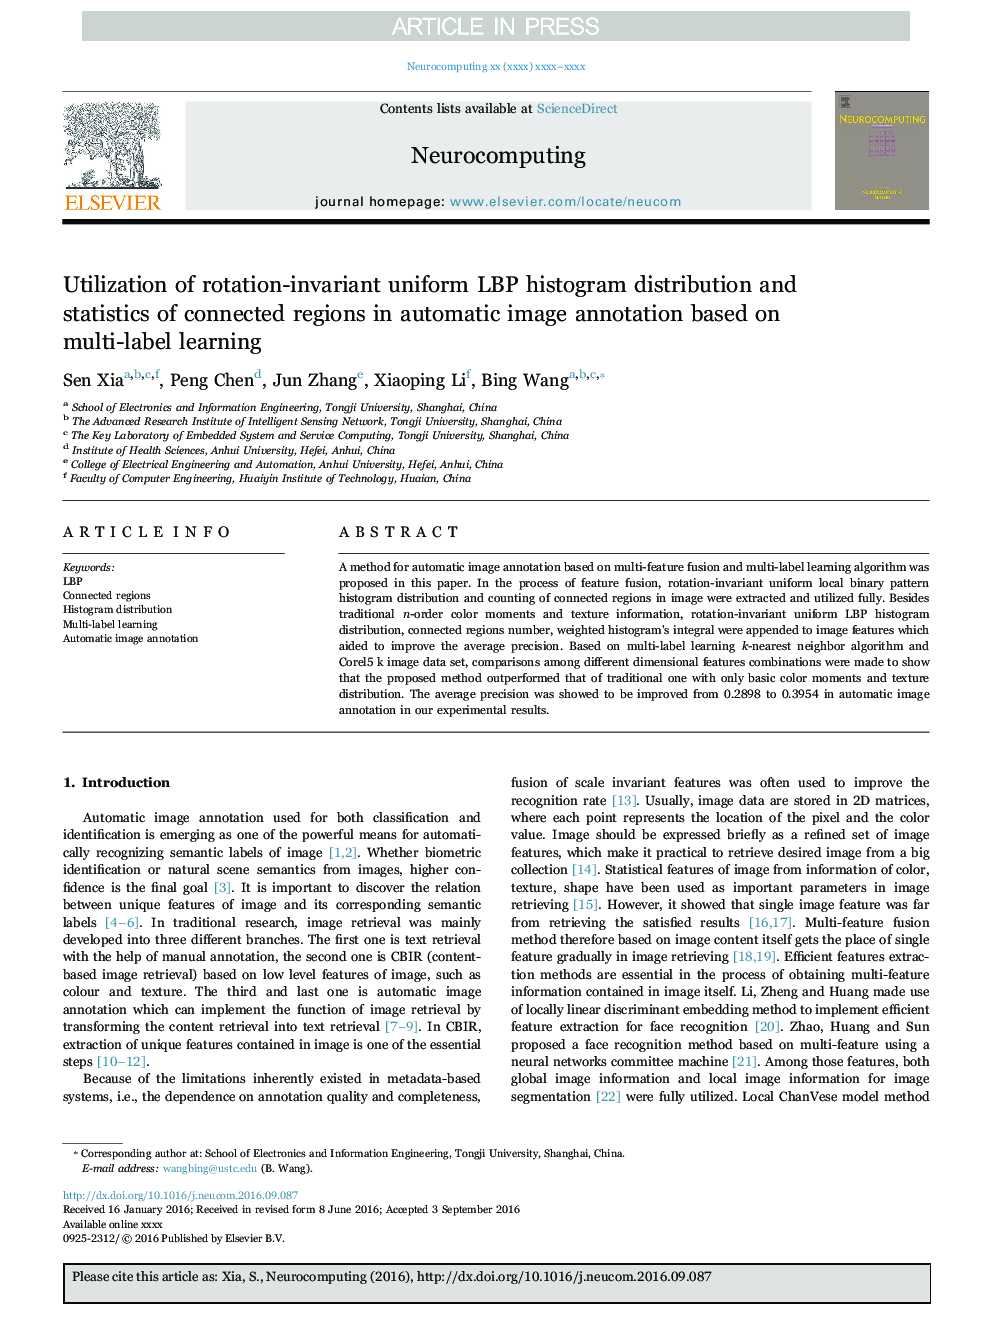 Utilization of rotation-invariant uniform LBP histogram distribution and statistics of connected regions in automatic image annotation based on multi-label learning